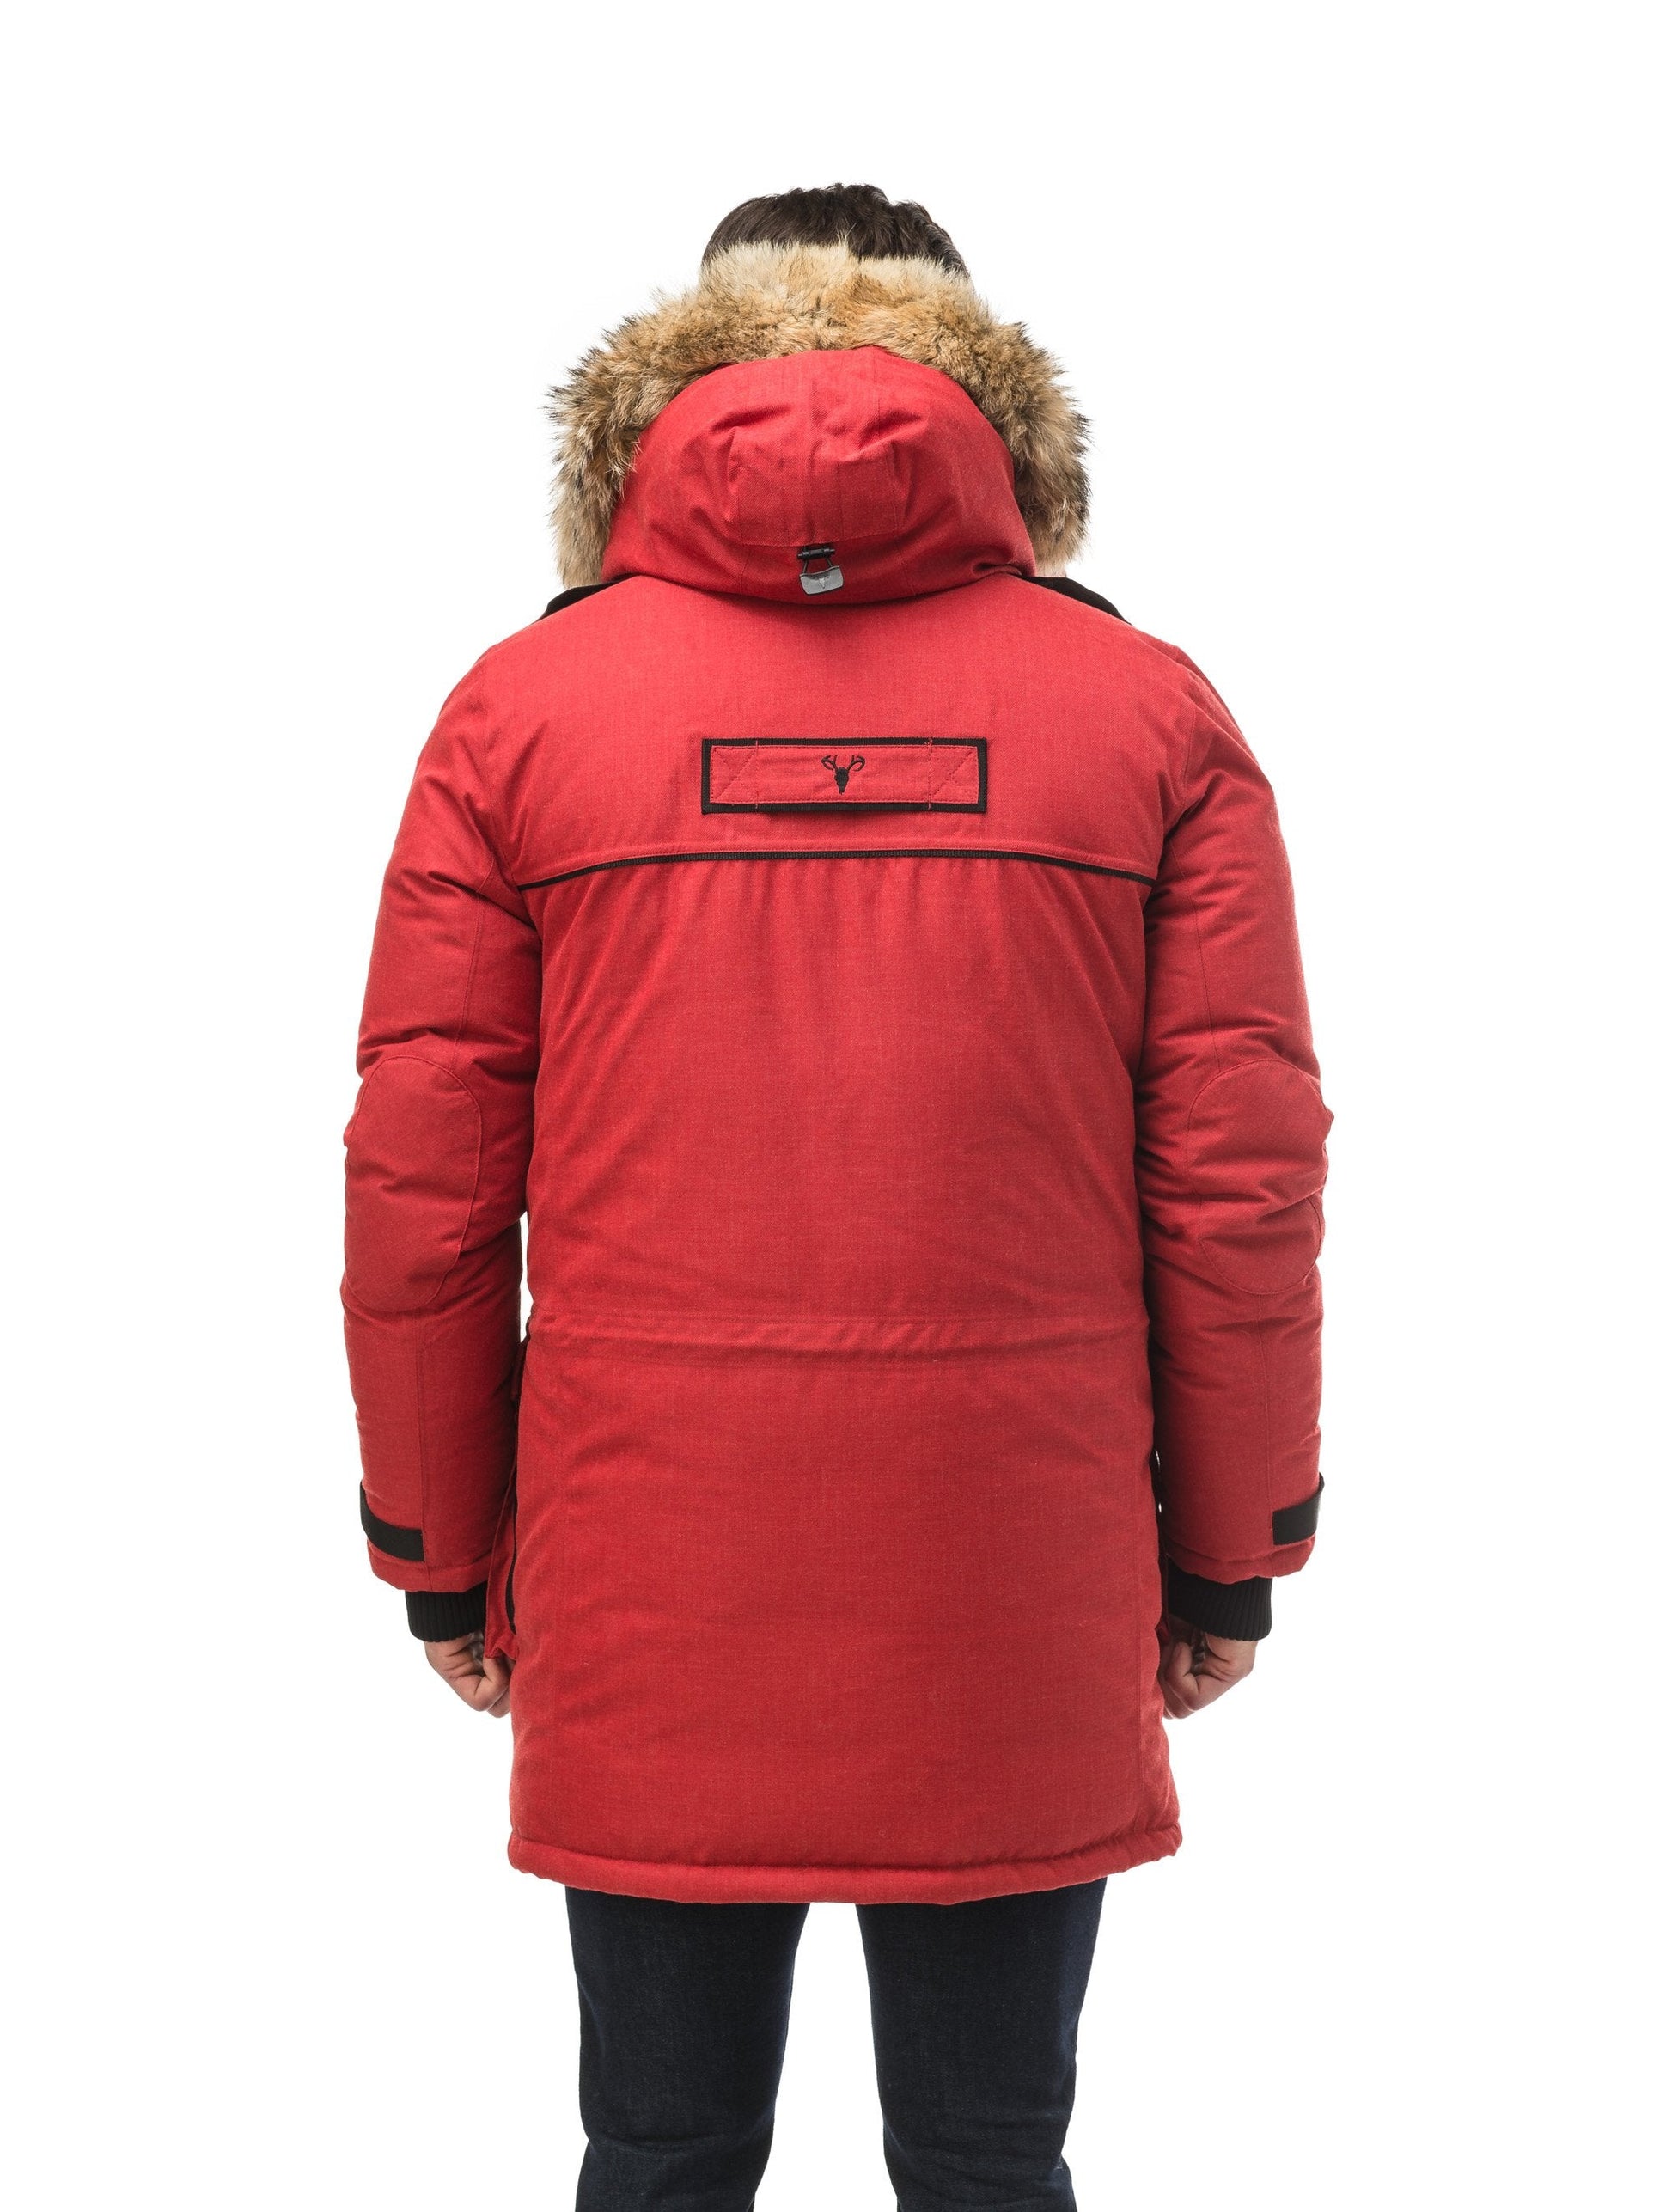 Men's extreme wamrth down filled parka with baffle box construction for even down distribution in H. Red